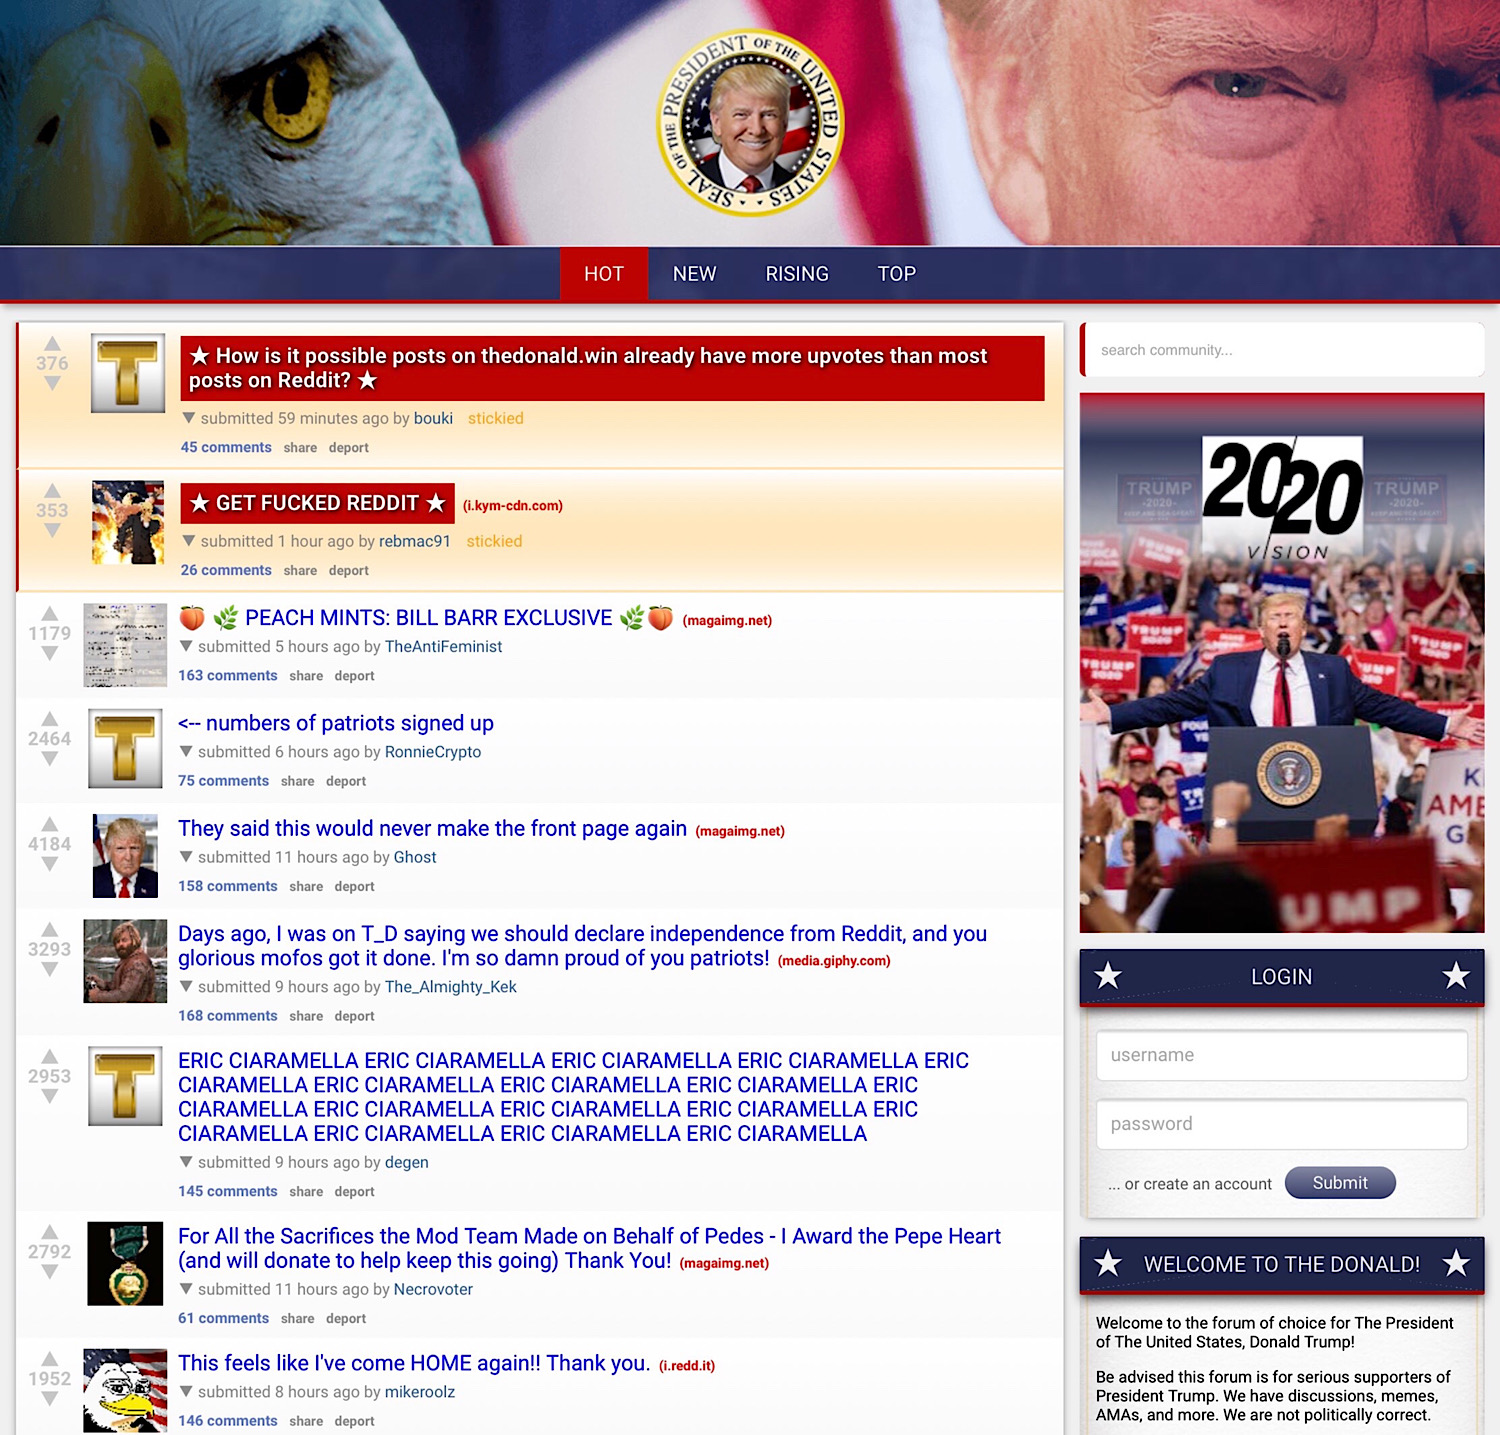 The Hot Page for TheDonald.win.